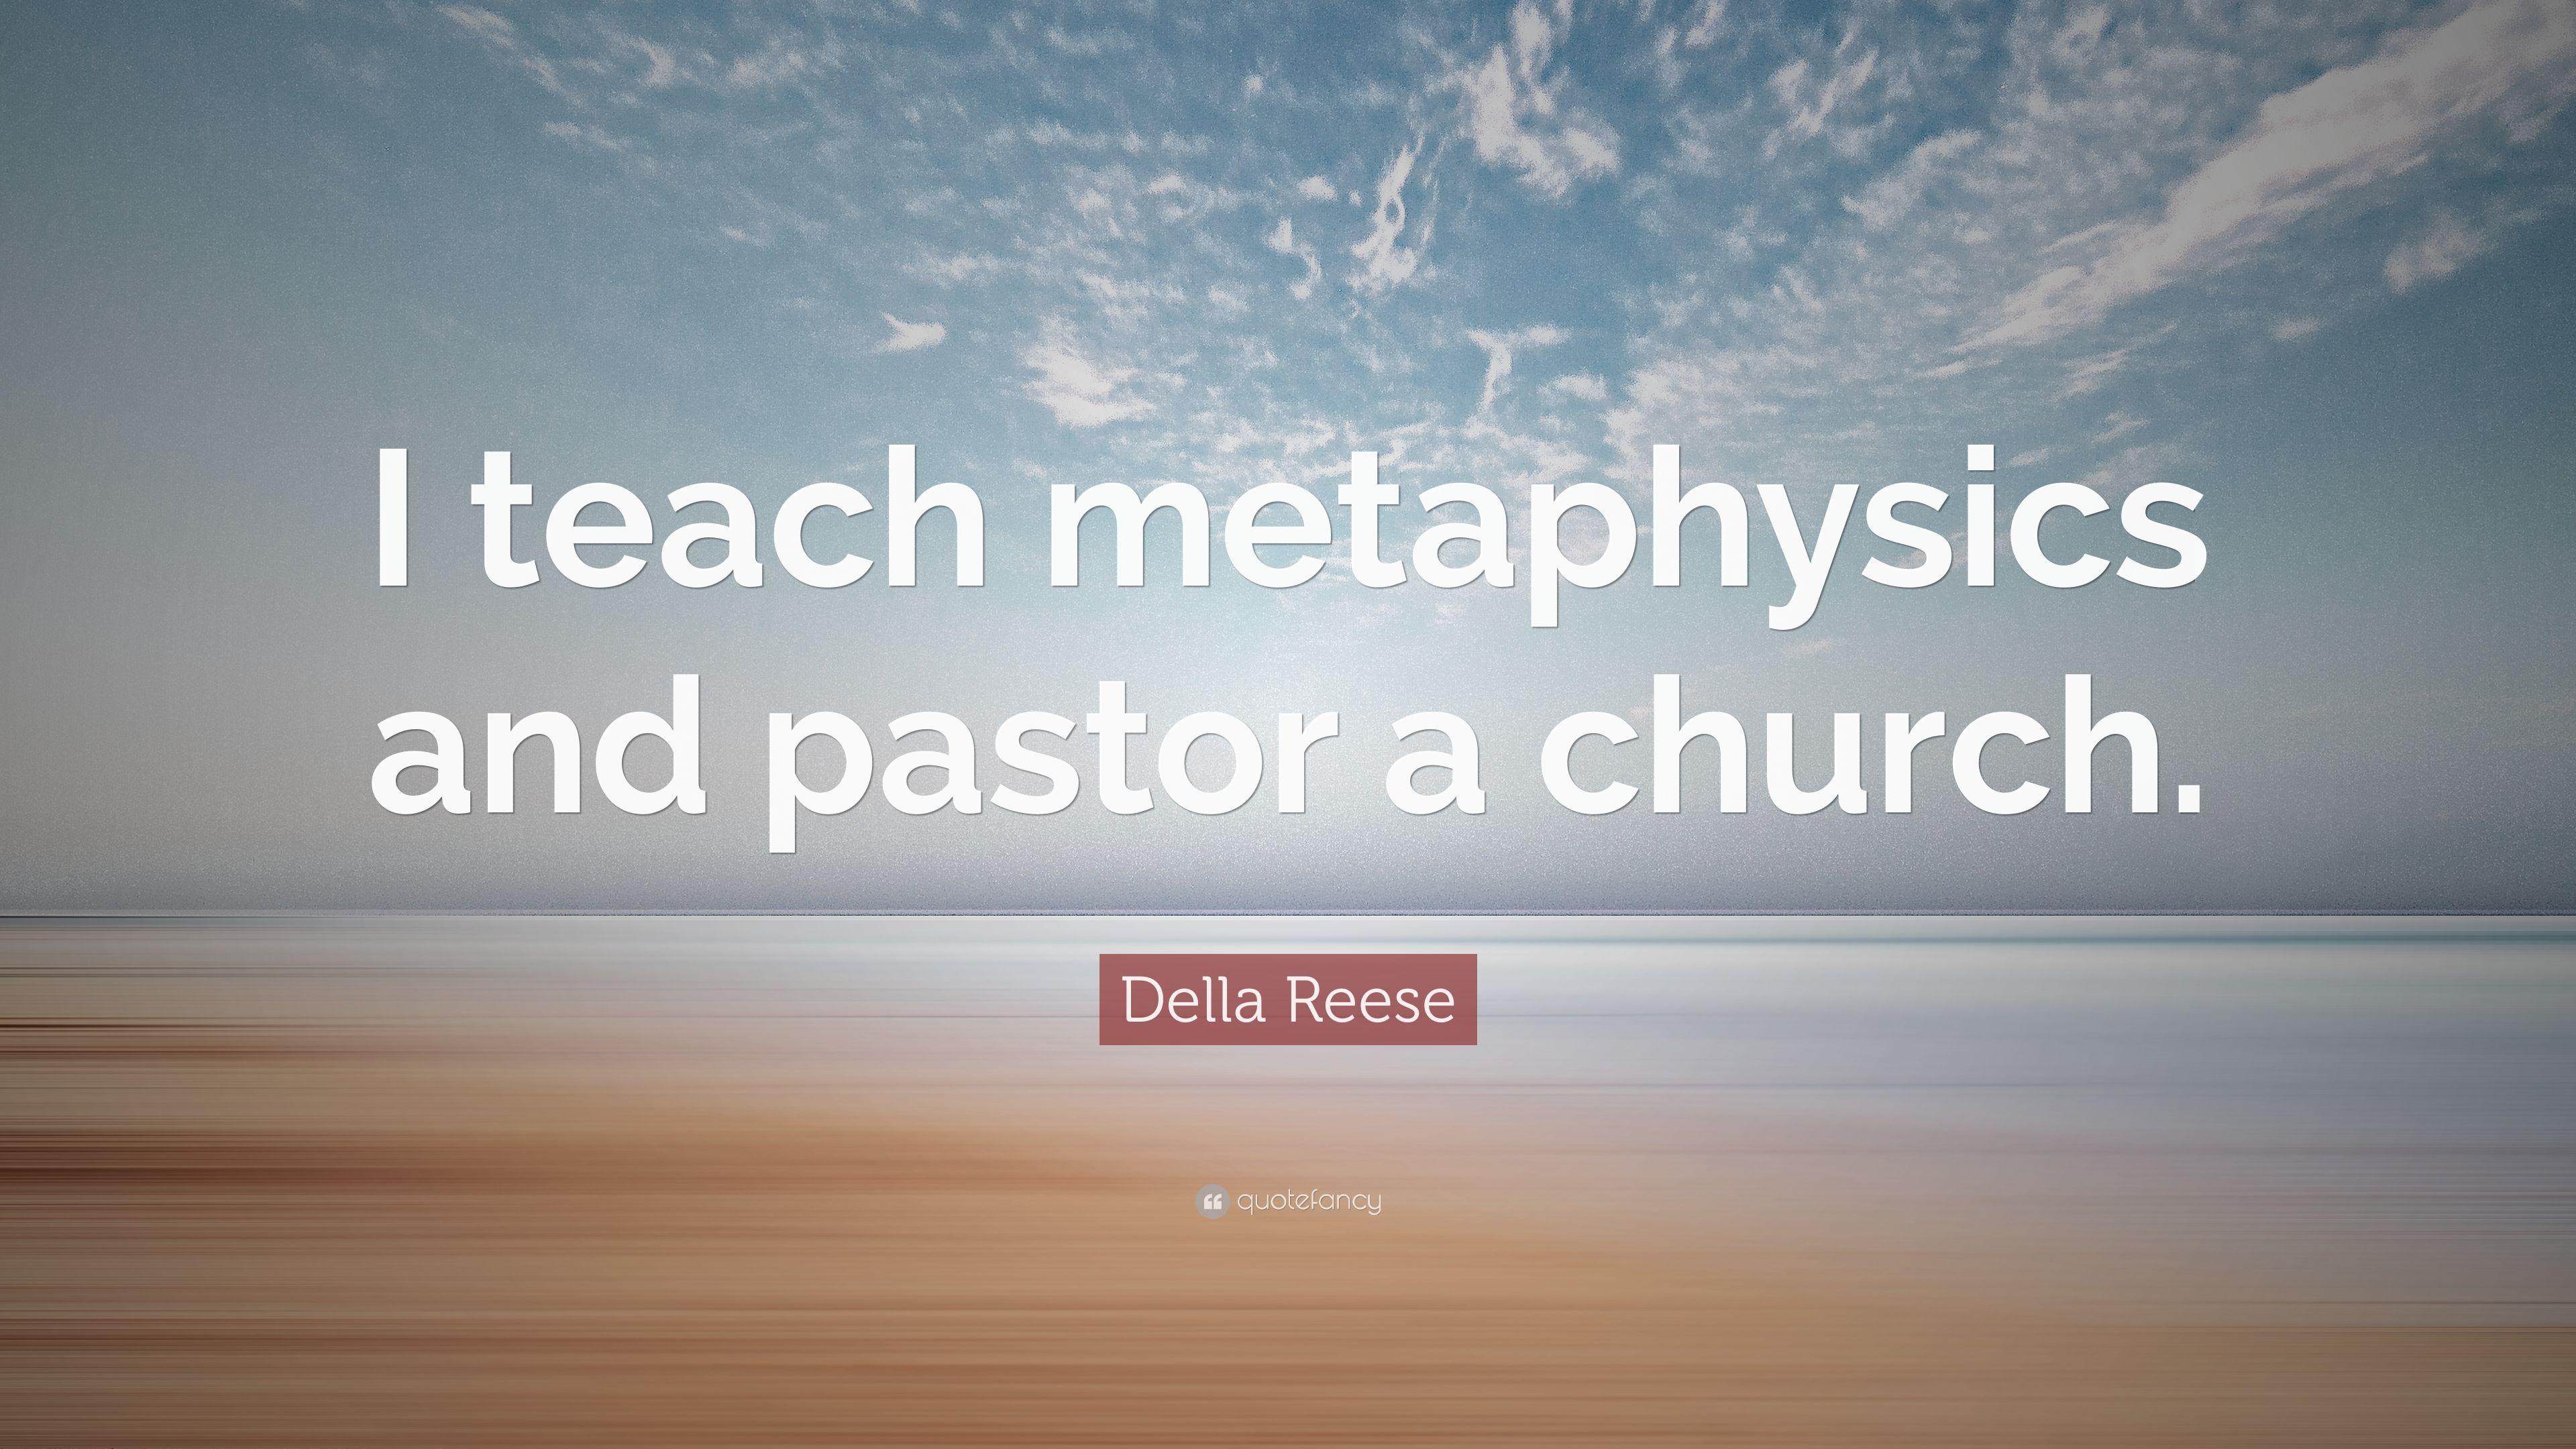 Della Reese Quote: “I teach metaphysics and pastor a church.” 5